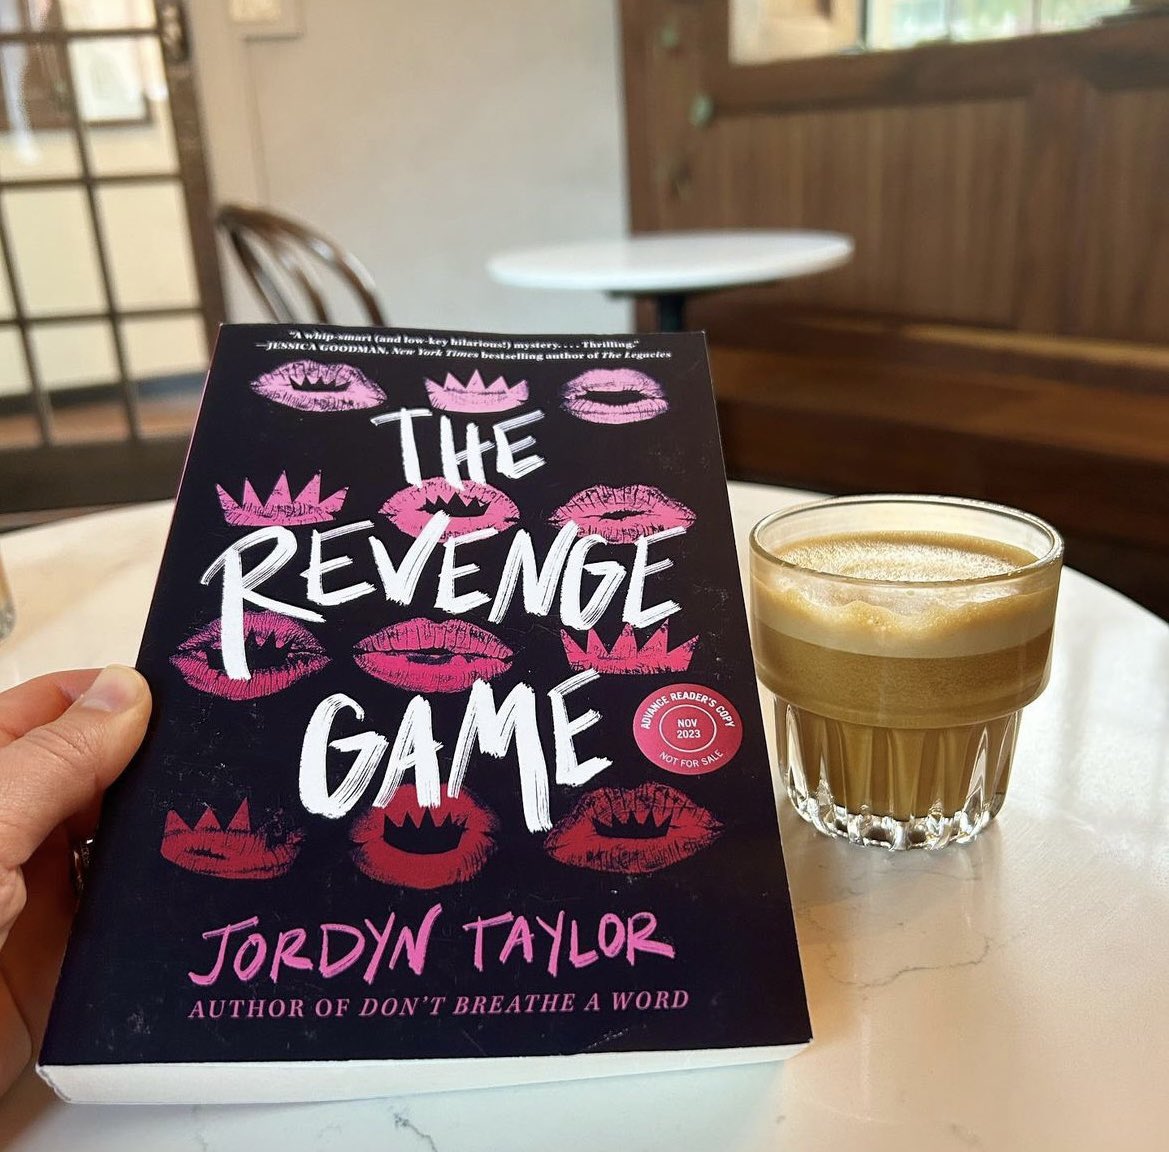 Pick up your copy of THE REVENGE GAME by Jordyn Taylor now! This book is a wickedly comic feminist mystery about the dark side of a hopeless romantic's seemingly perfect love story. #TheRevengeGame #YALit